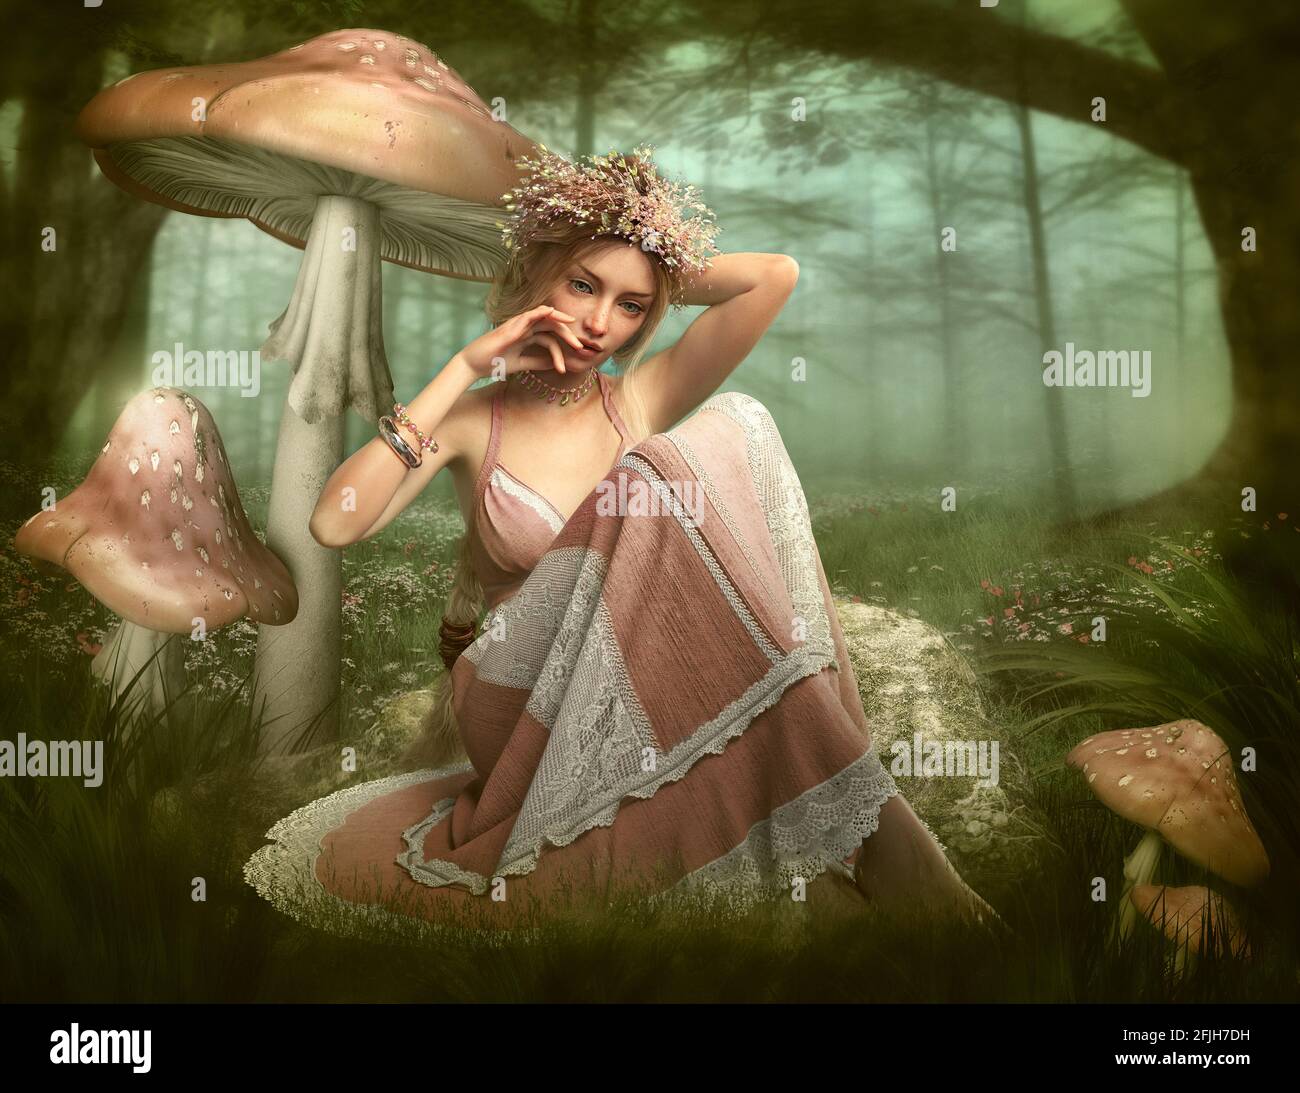 3d computer graphics of a fairy sitting in a forest surrounded by mushrooms Stock Photo